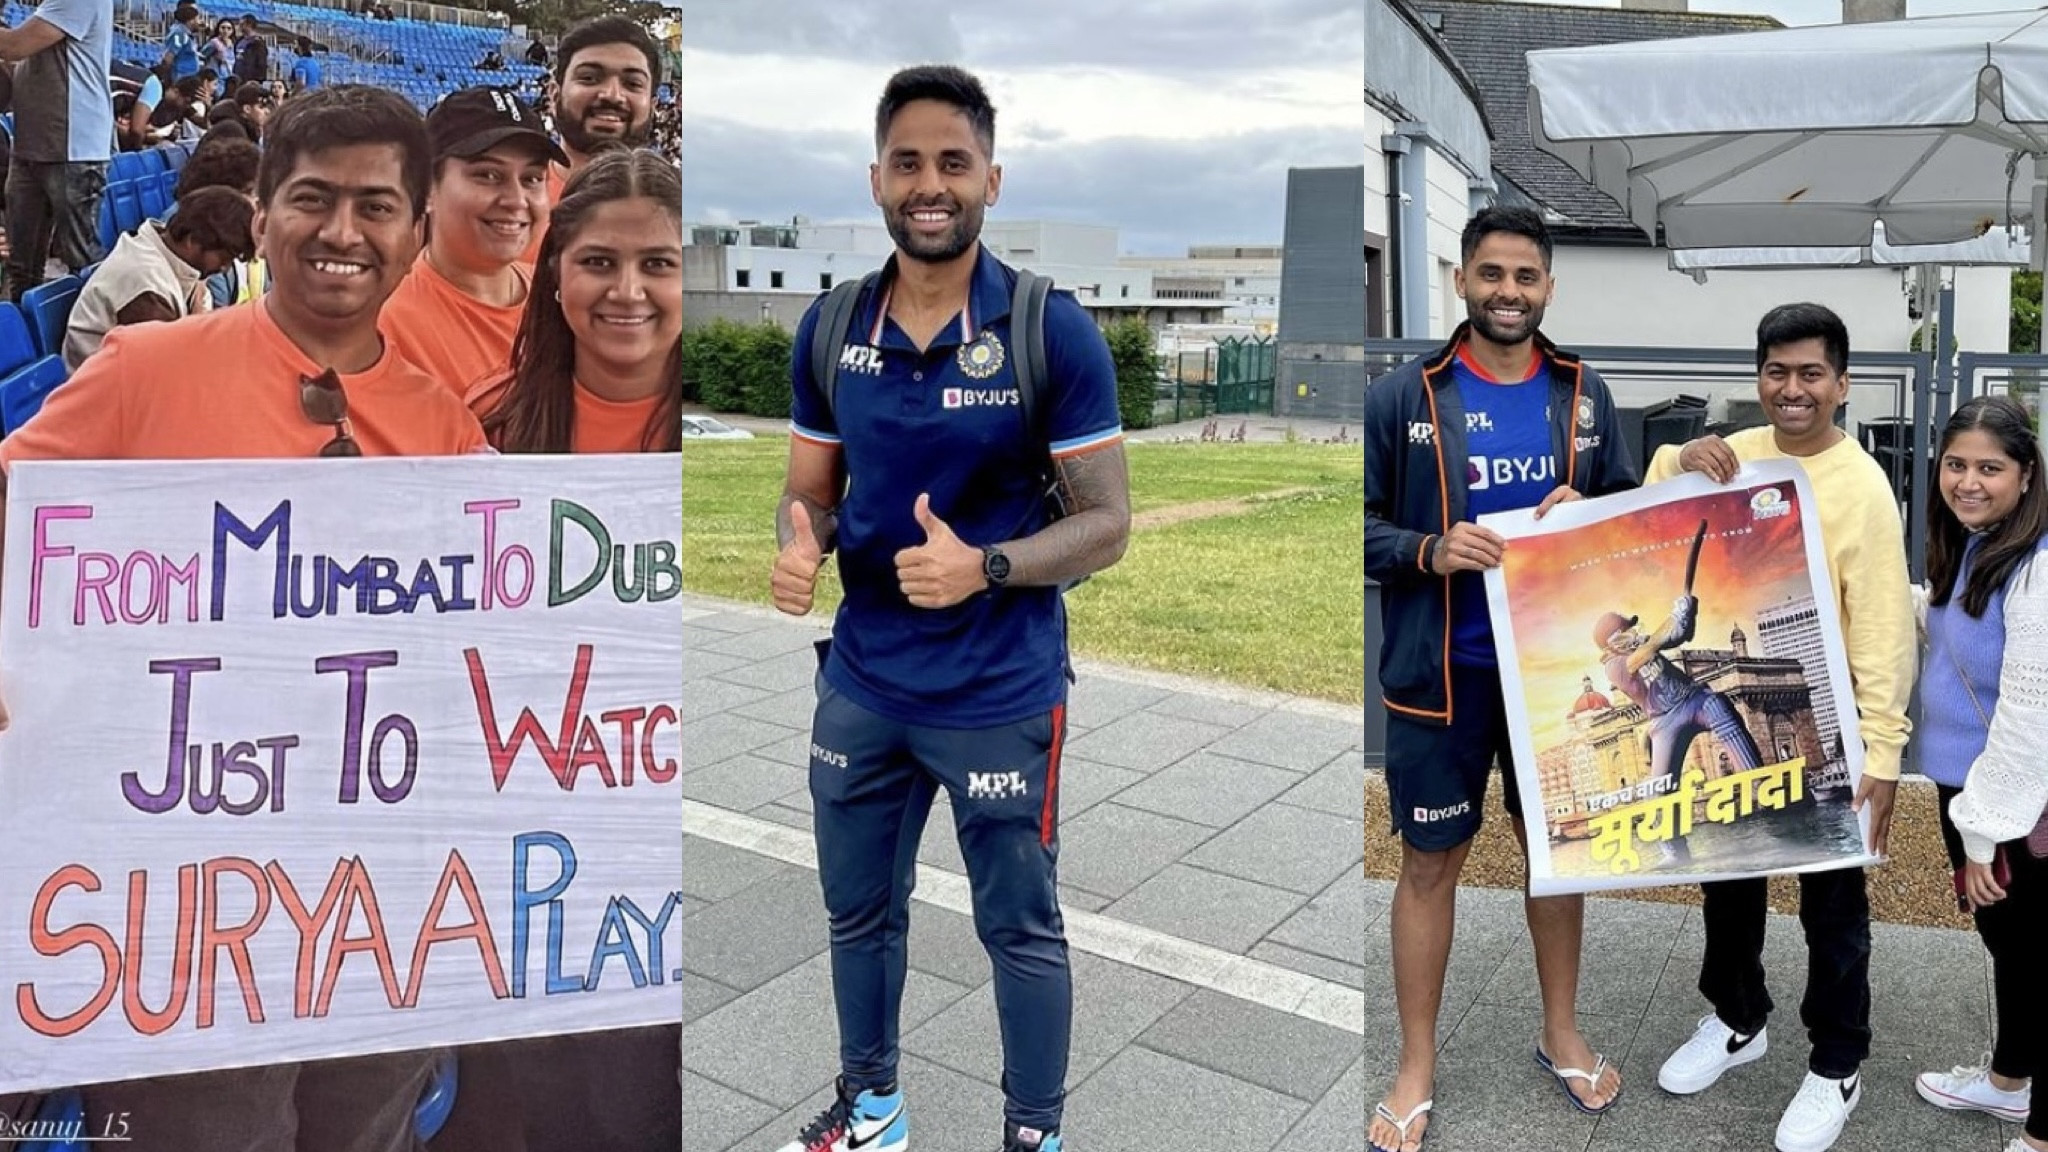 IRE v IND 2022: See Pics - Suryakumar Yadav meets fans who travelled from Mumbai to Dublin to see him play